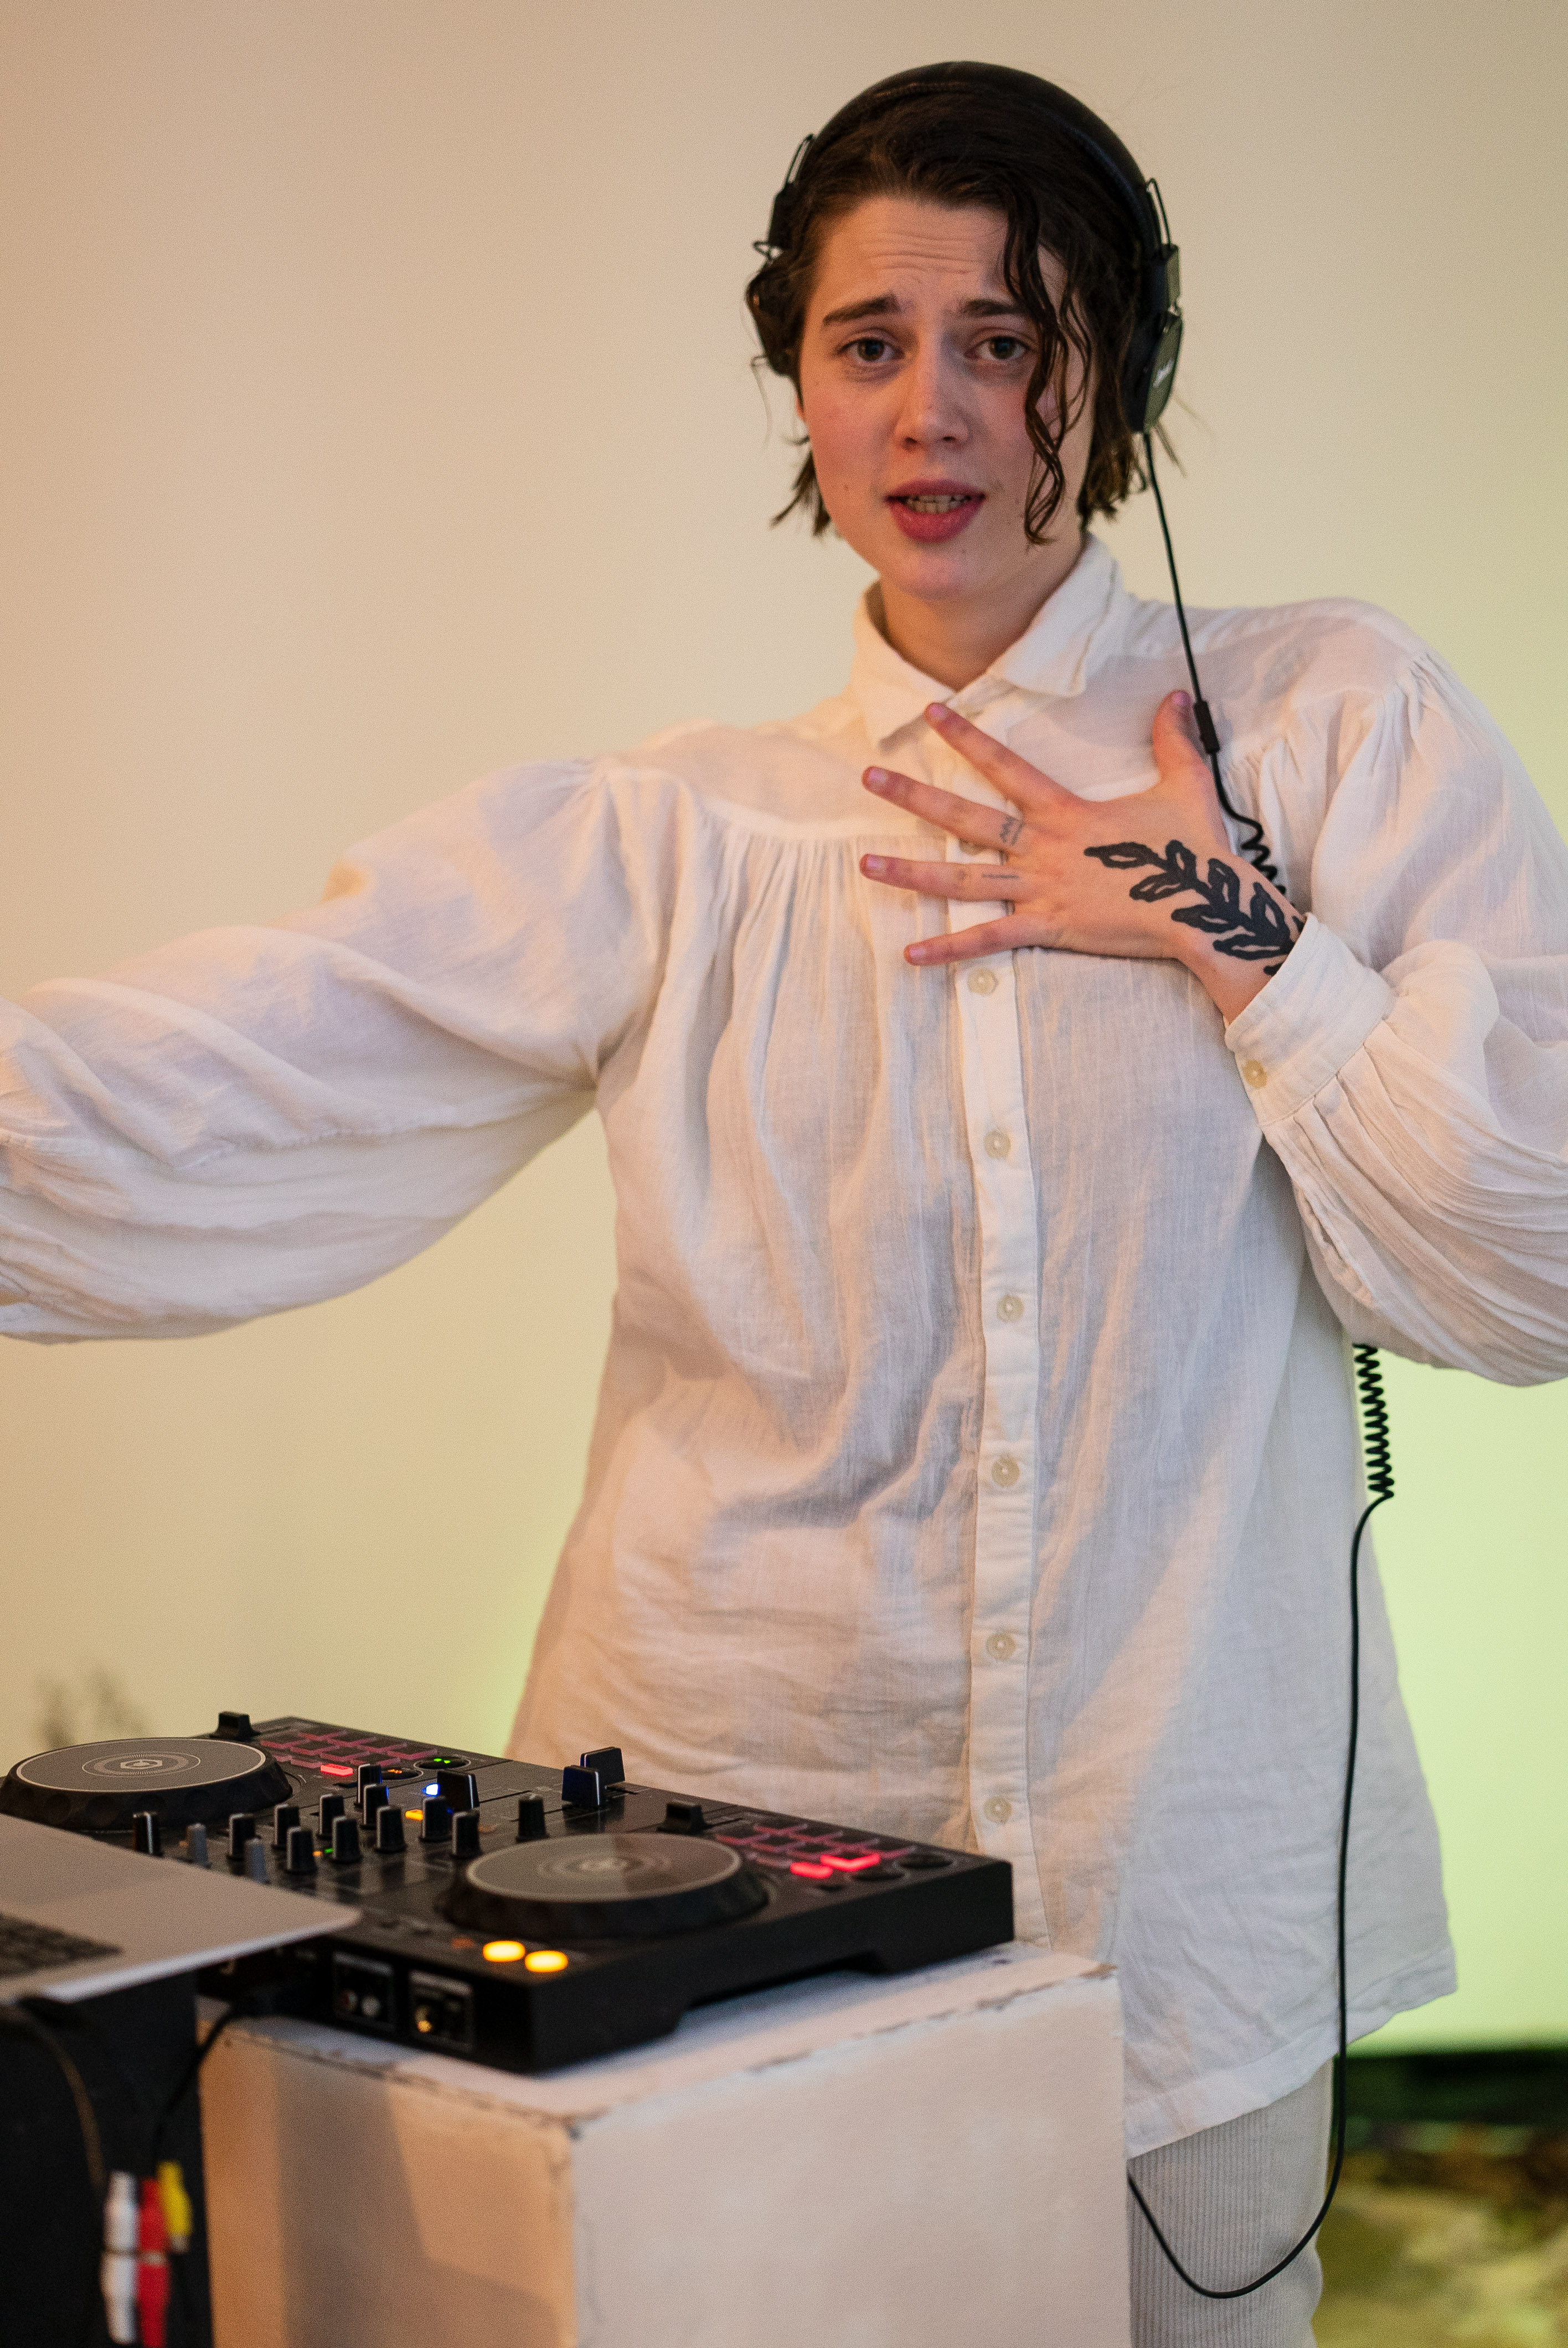 The photo is a medium shot of a person wearing white clothes and headphones dancing in front of a dj table. With the left hand on their chest they are looking into the camera, their mouth looks like as if they were singing.